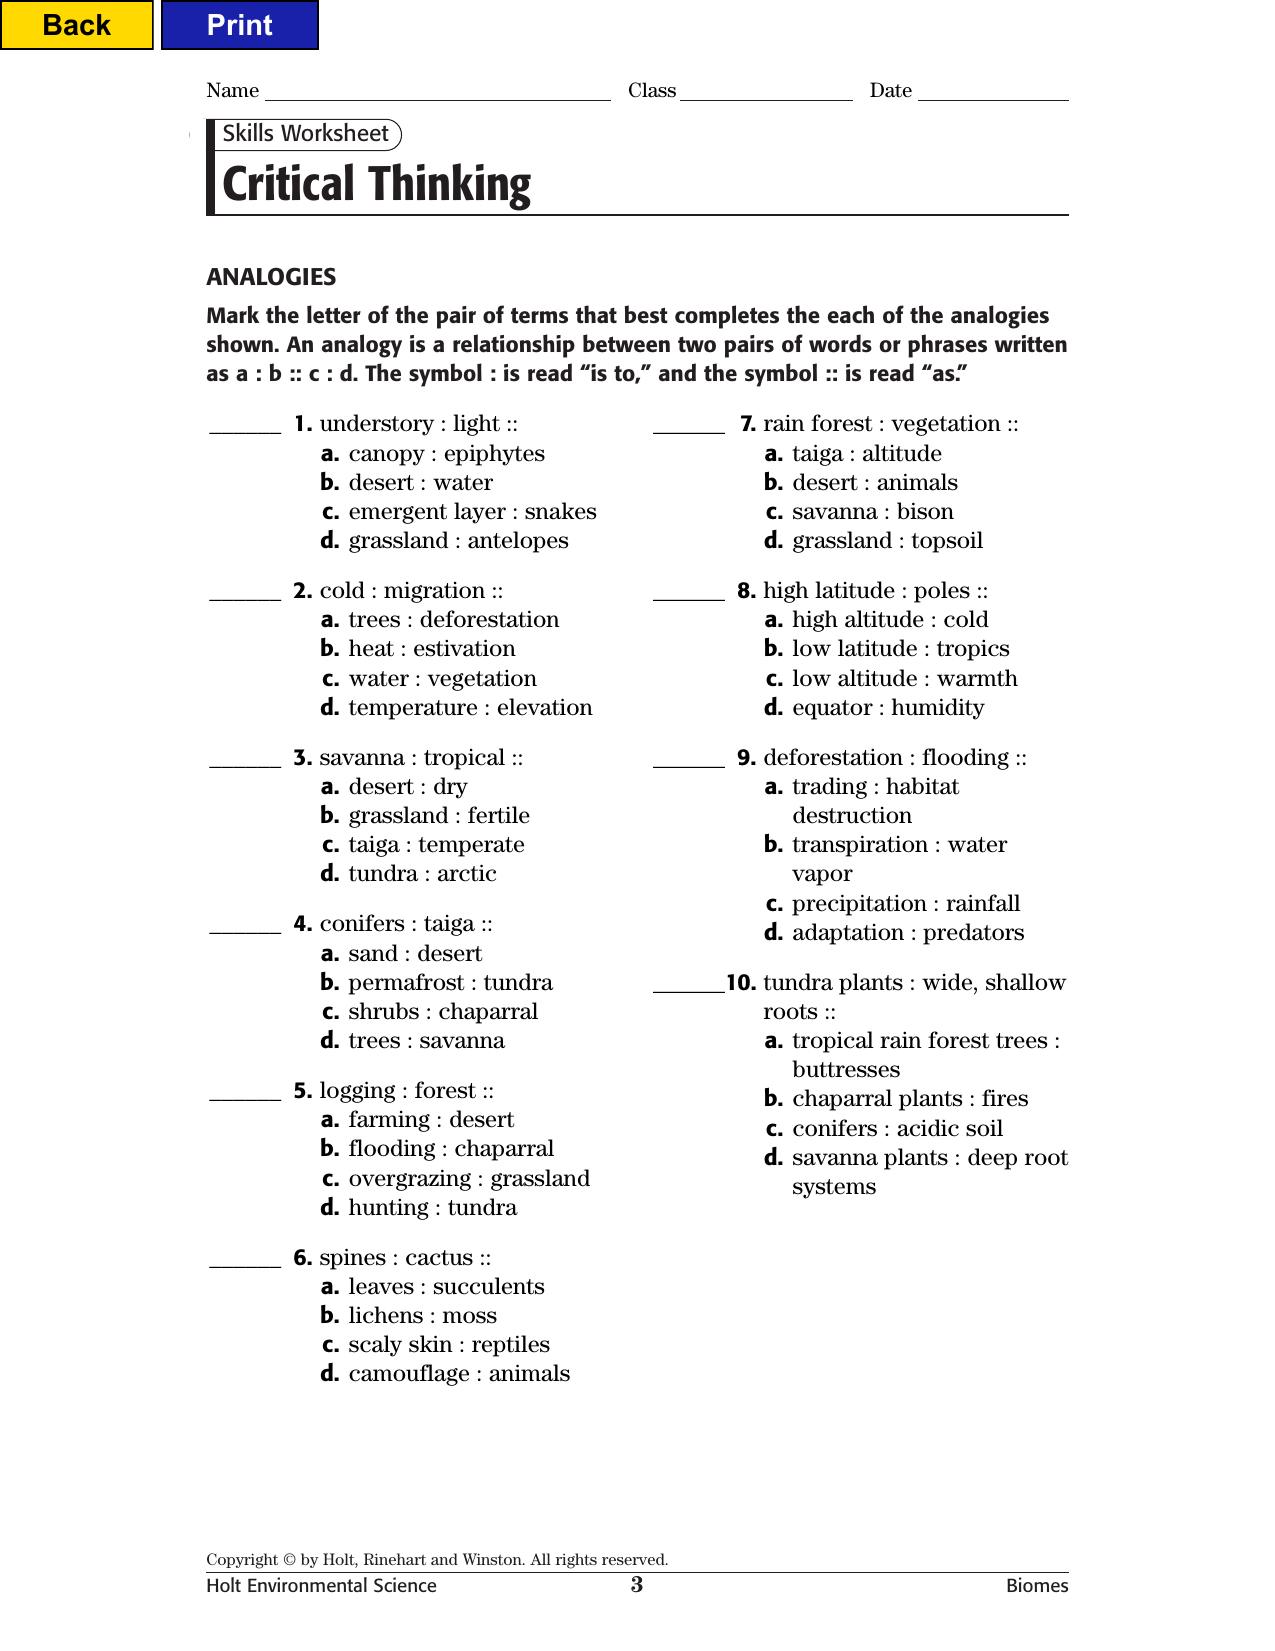 chapter 4 critical thinking answers environmental science